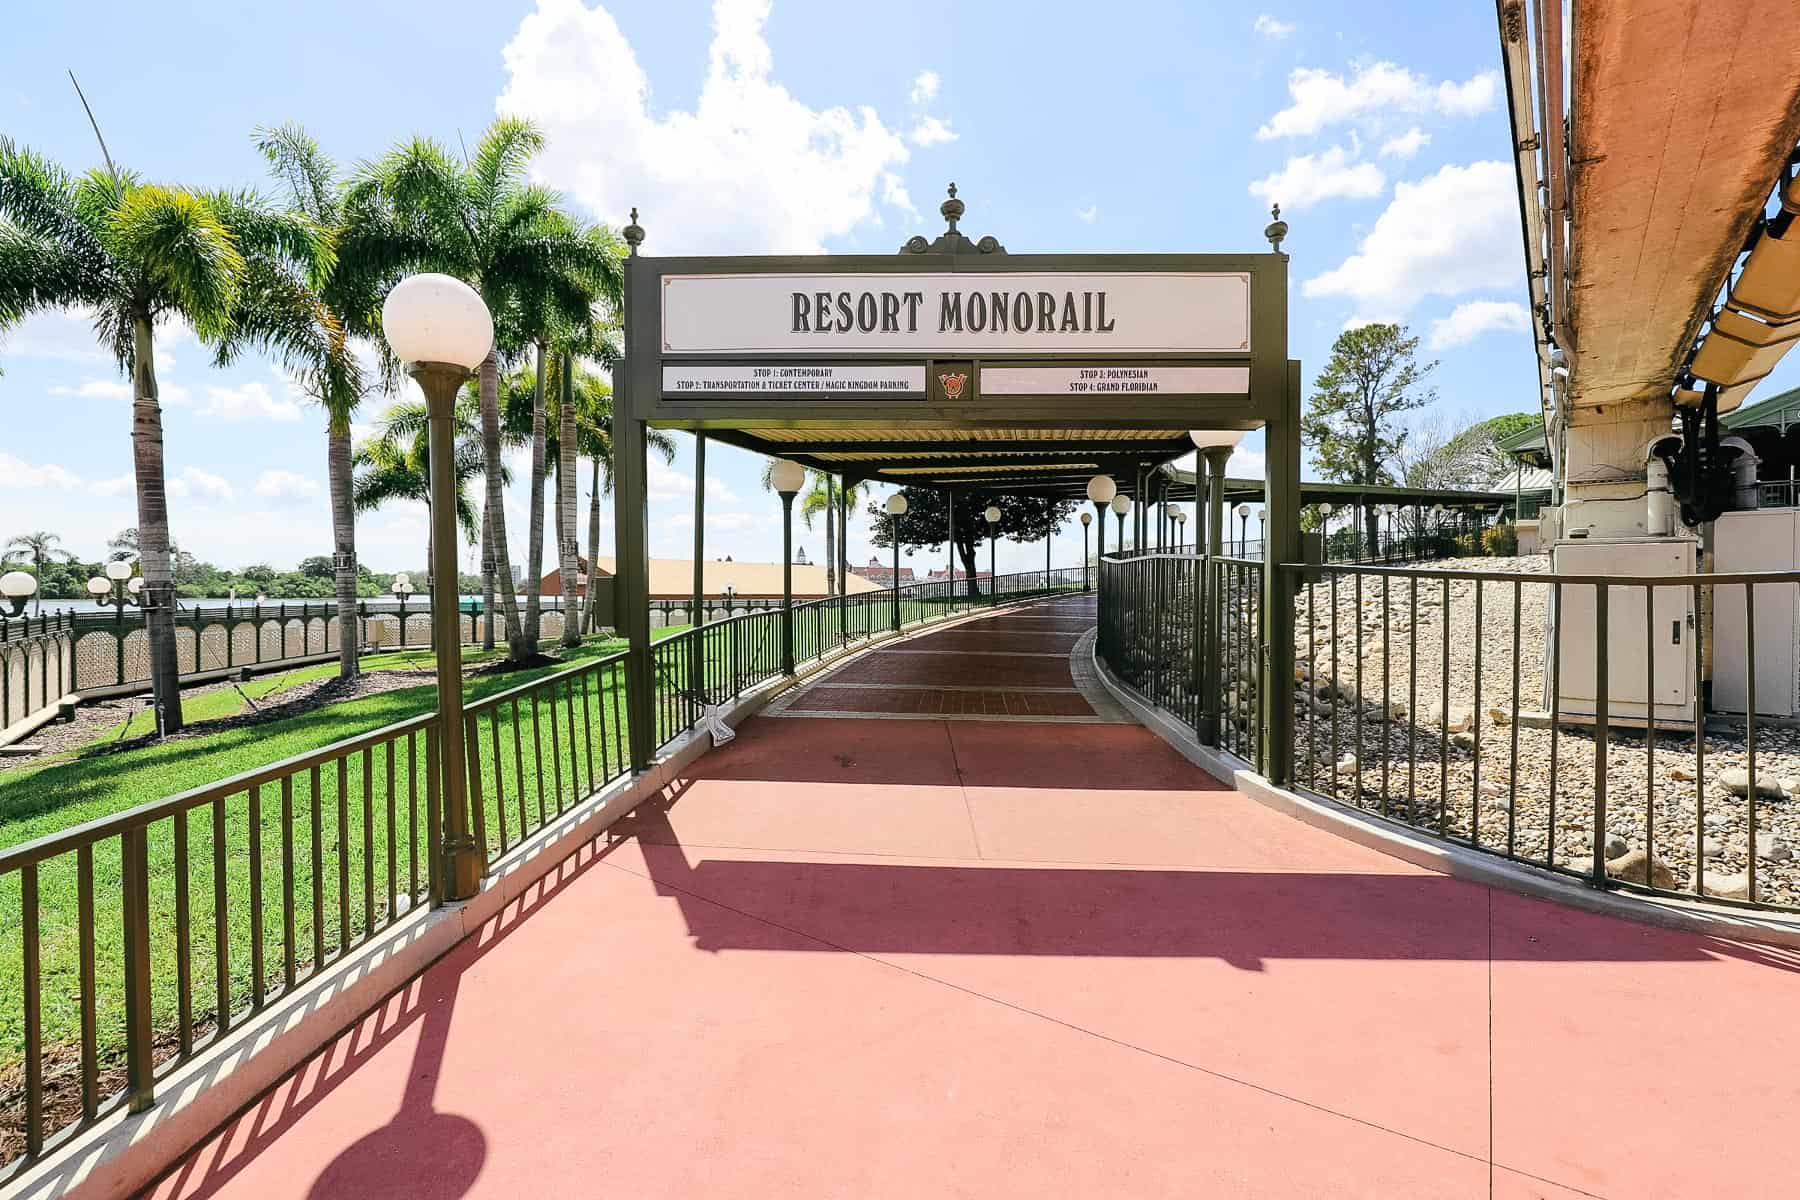 A walkway that leads up to the resort monorail at Magic Kingdom.